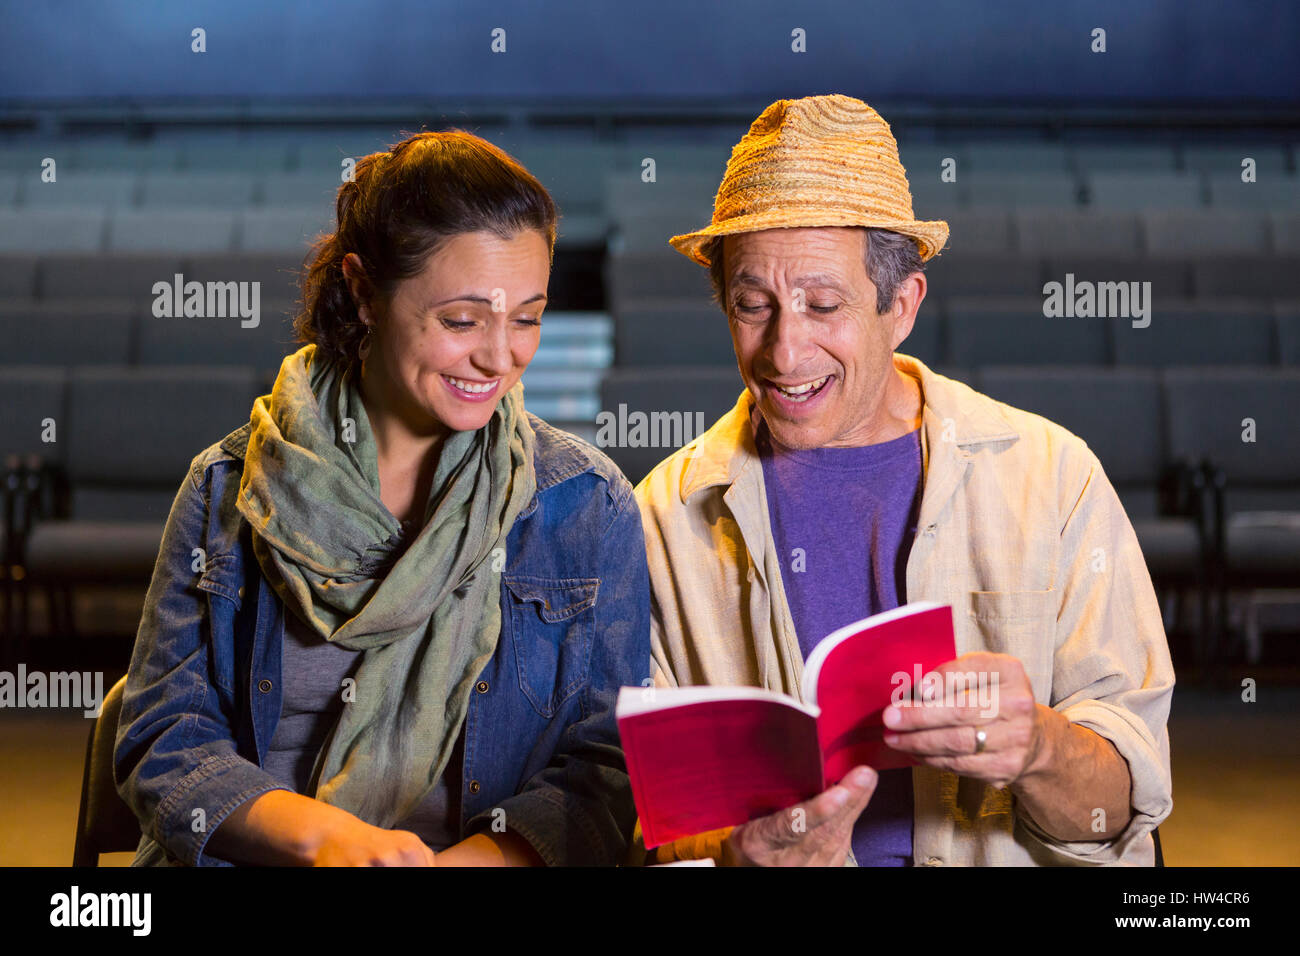 Caucasian actors rehearsing with script in theater Stock Photo